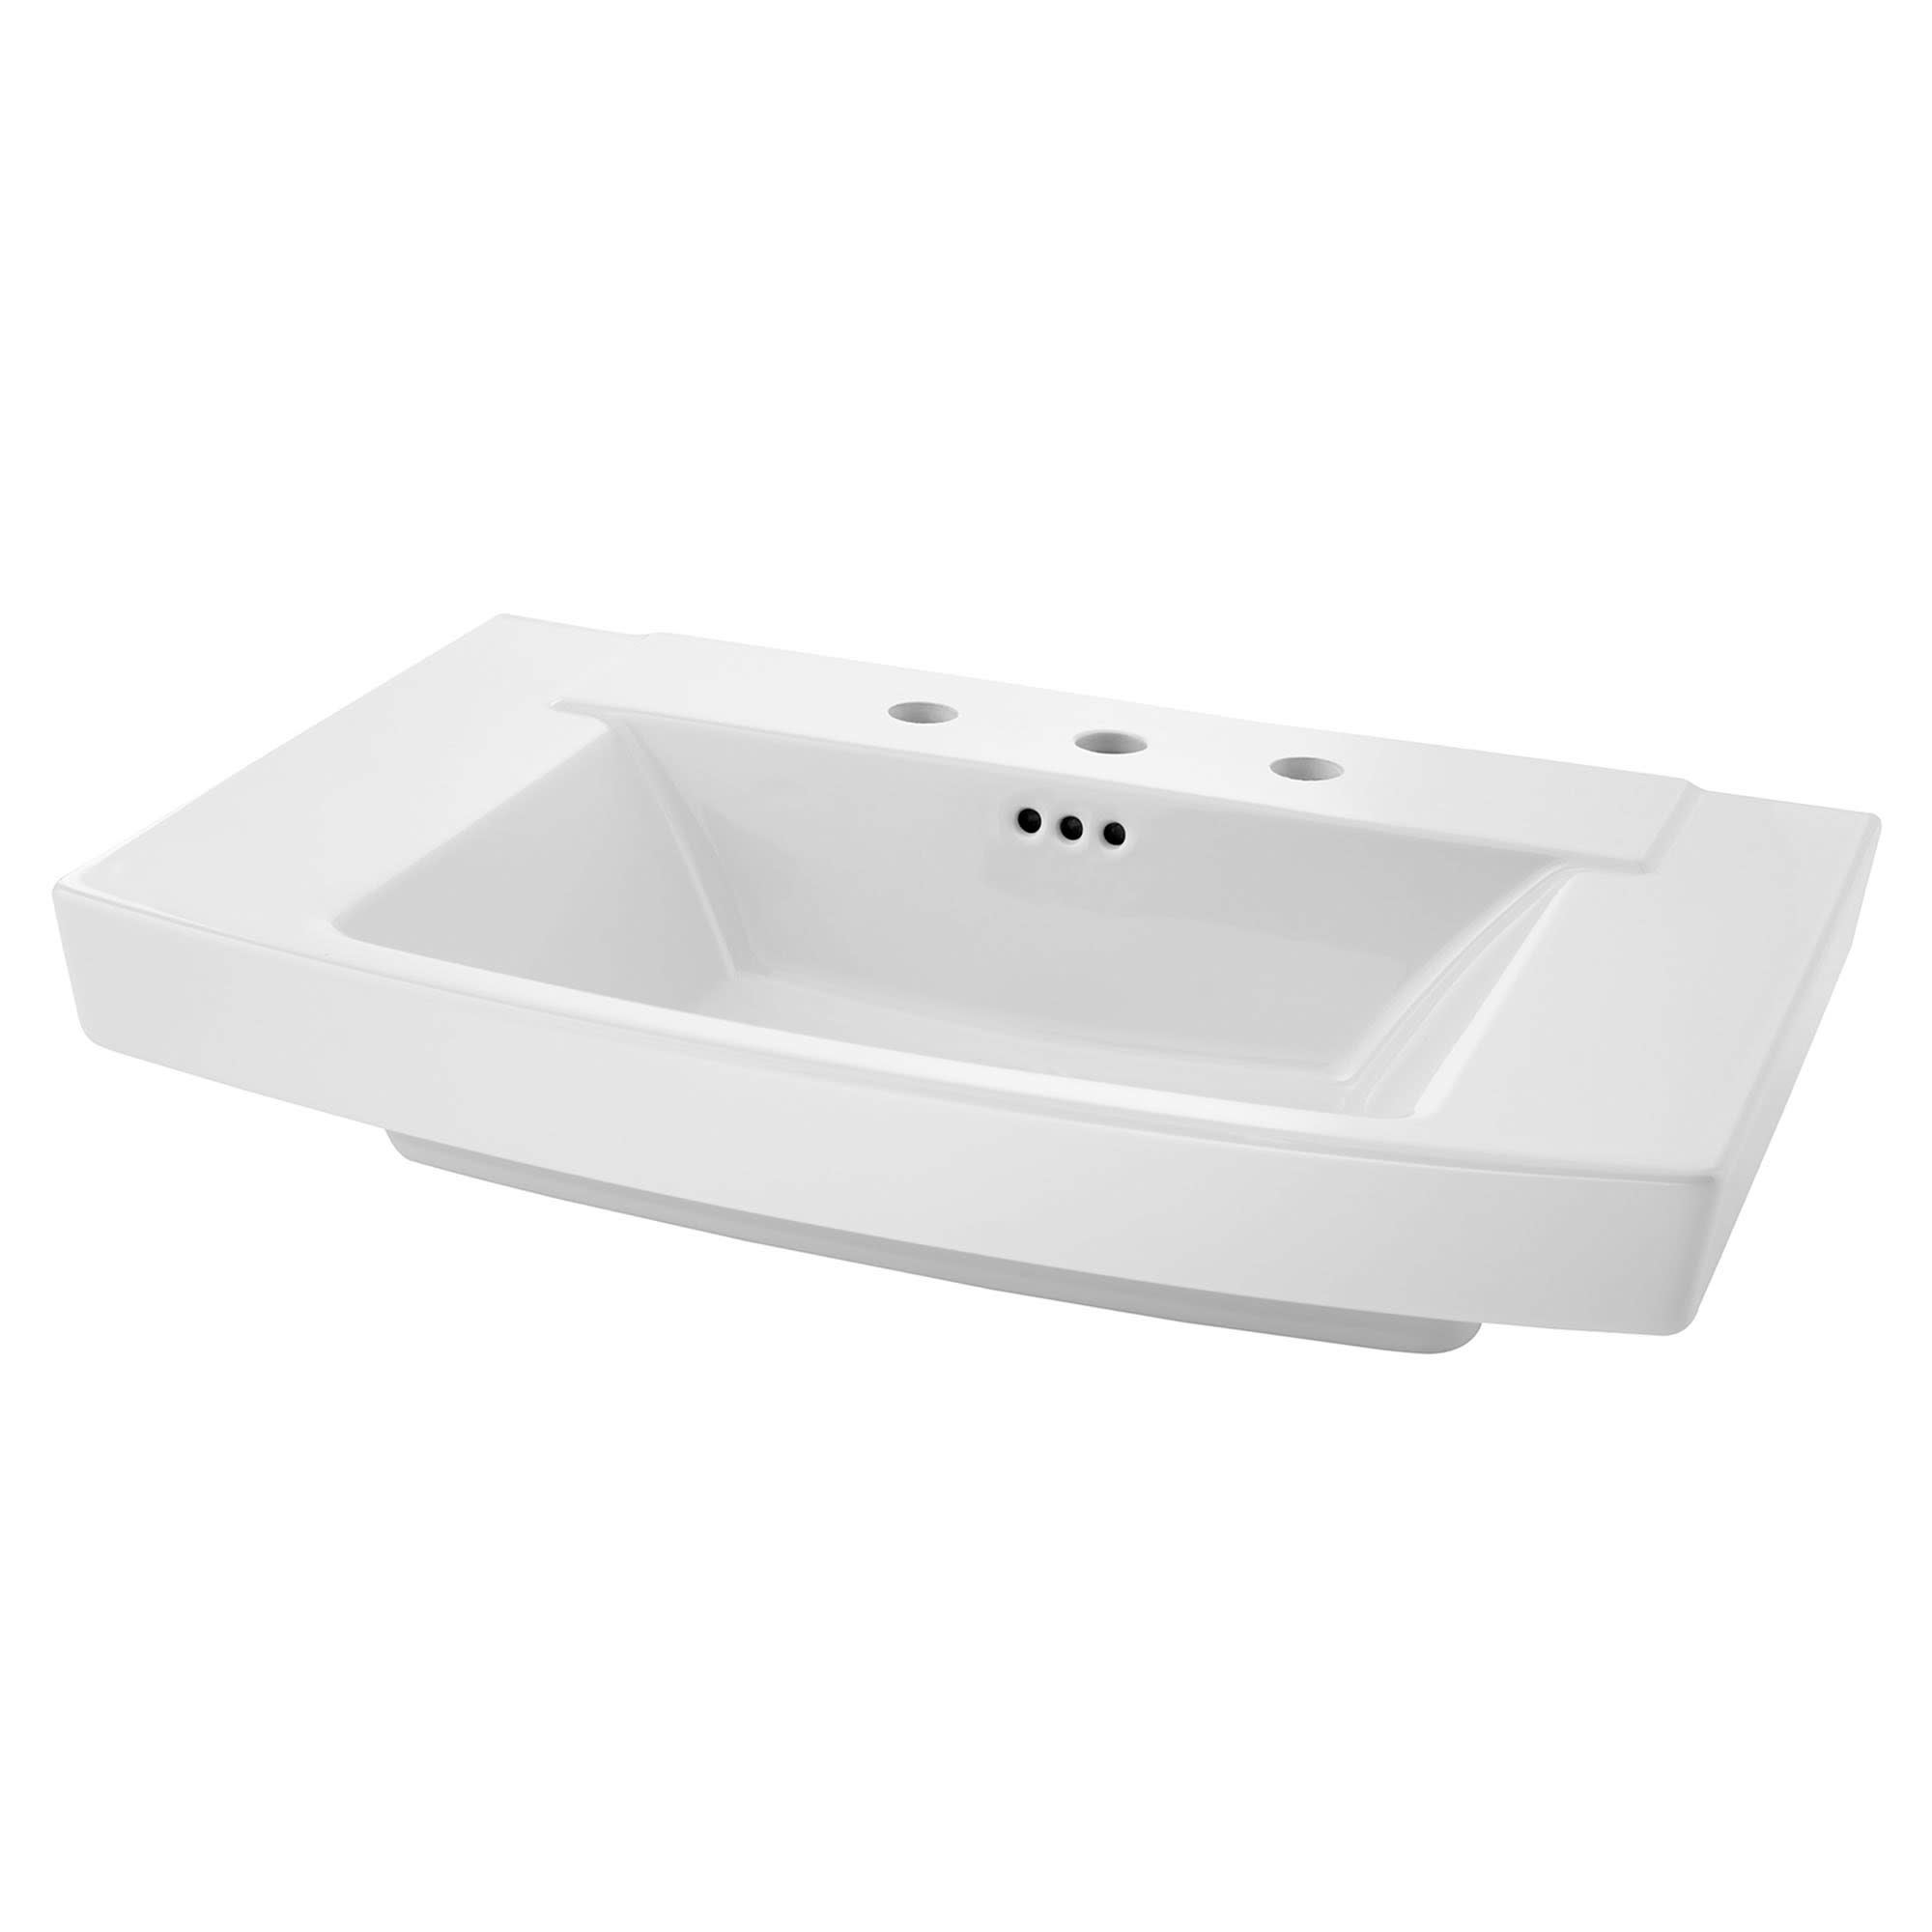 Details About American Standard 0328 008 Townsend 30 Fireclay Pedestal Bathroom Sink With 3 F